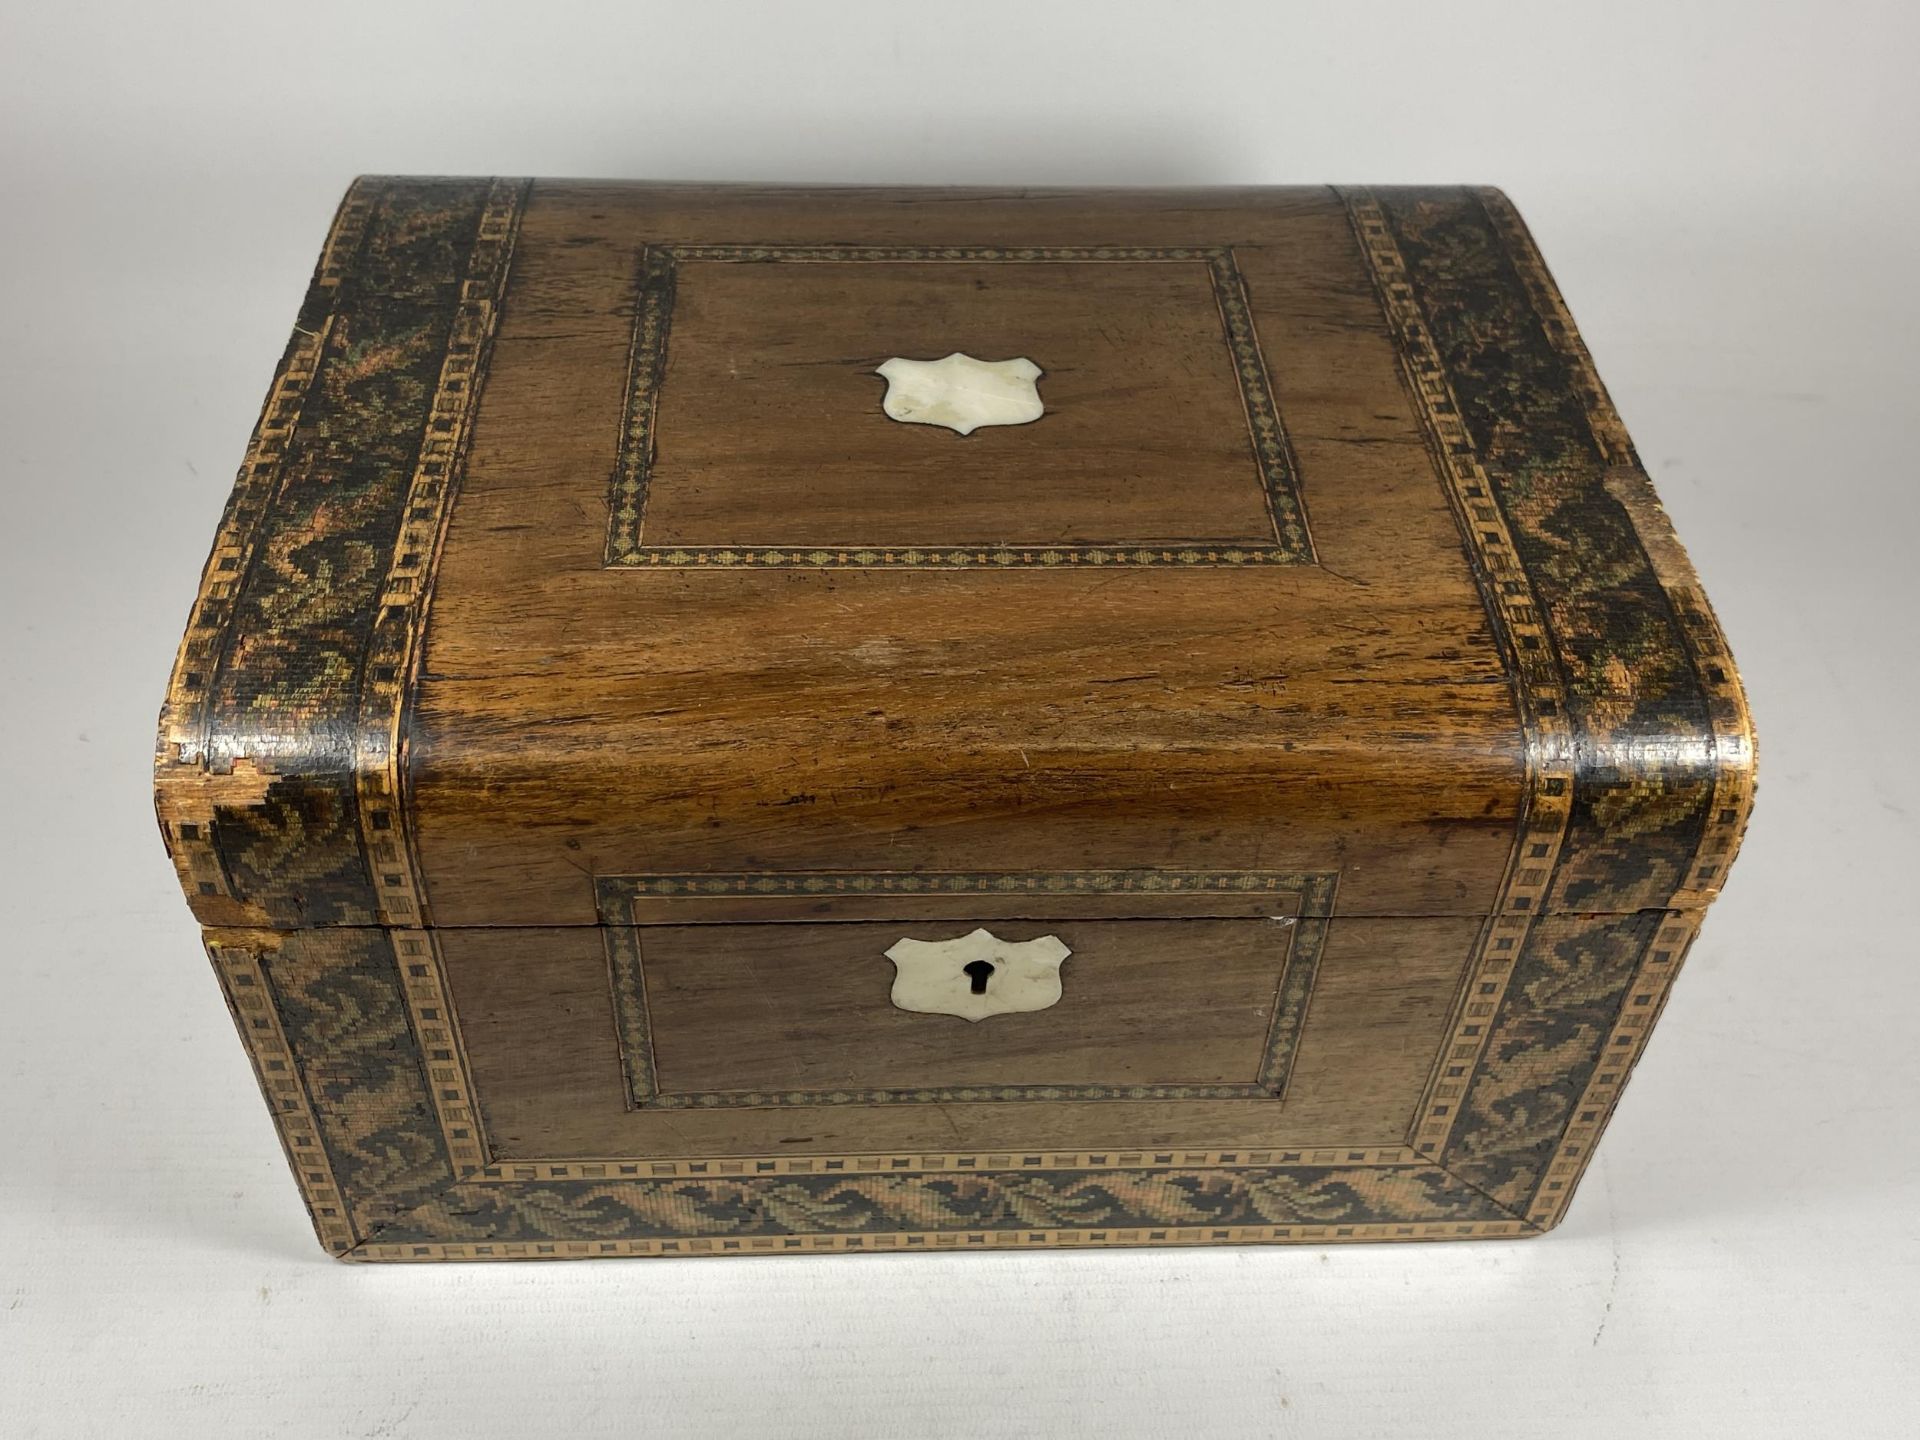 A VINTAGE INLAID SEWING BOX WITH MOTHER OF PEARL DESIGN